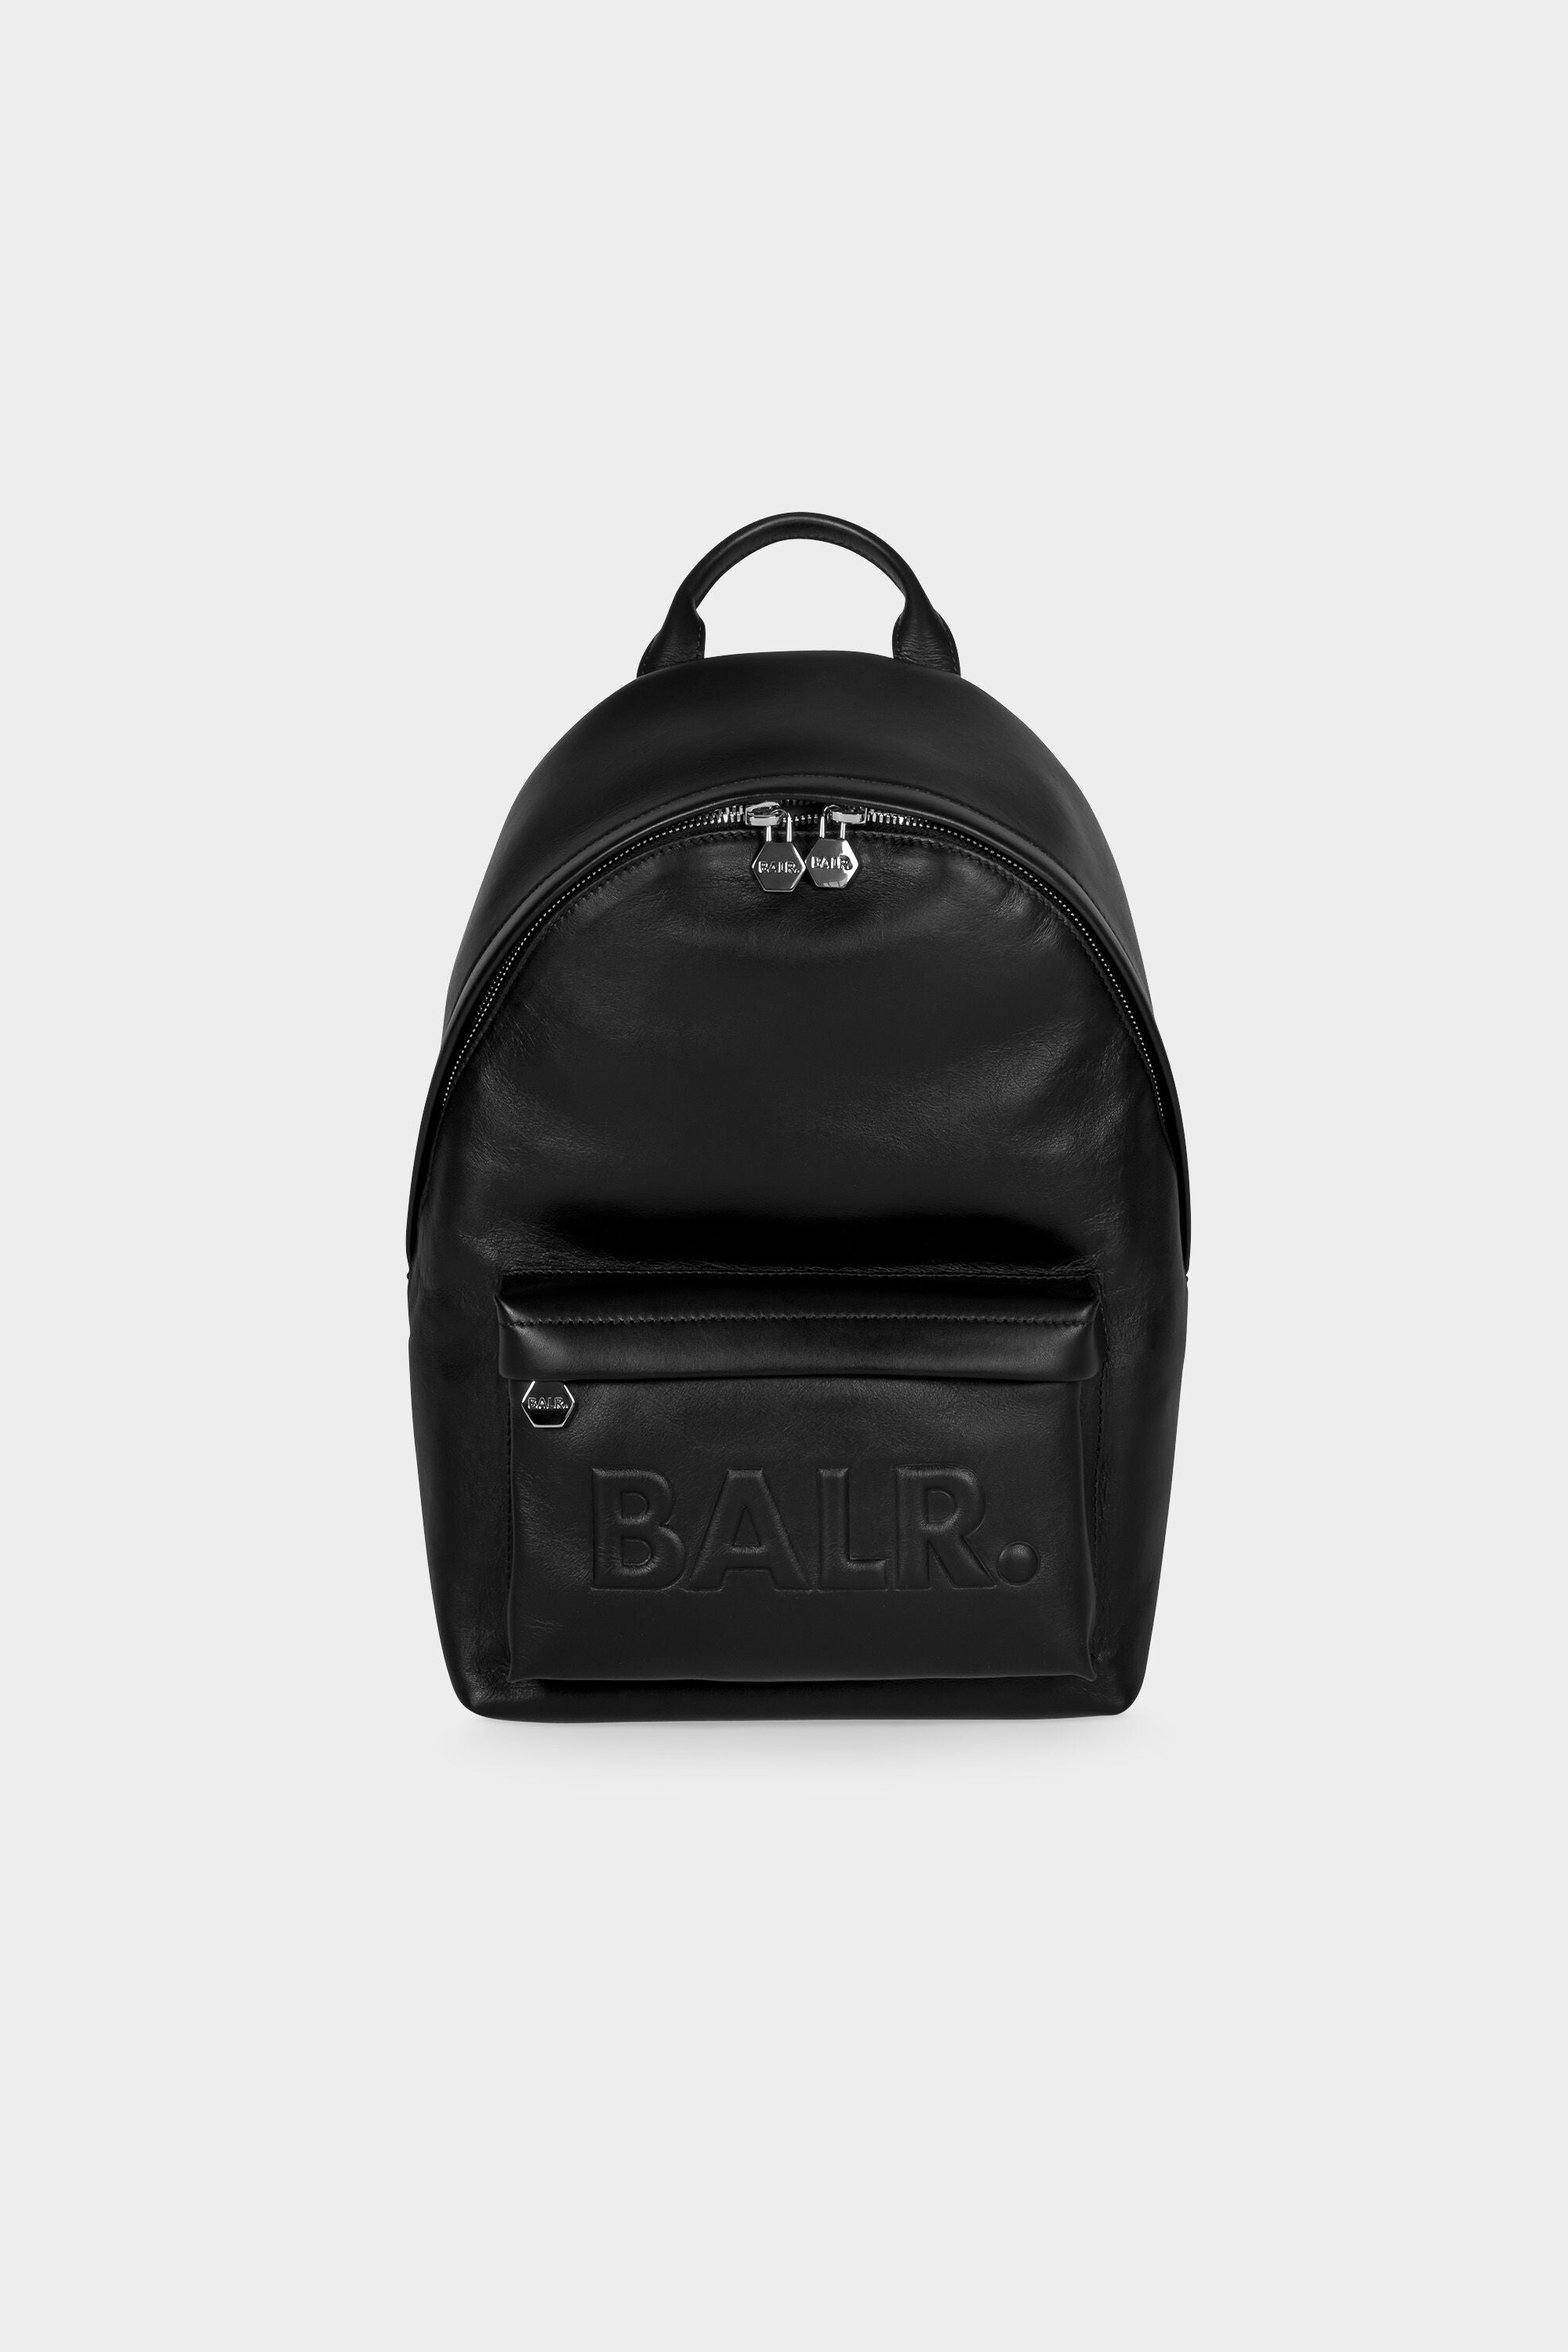 BT Leather Petite Backpack